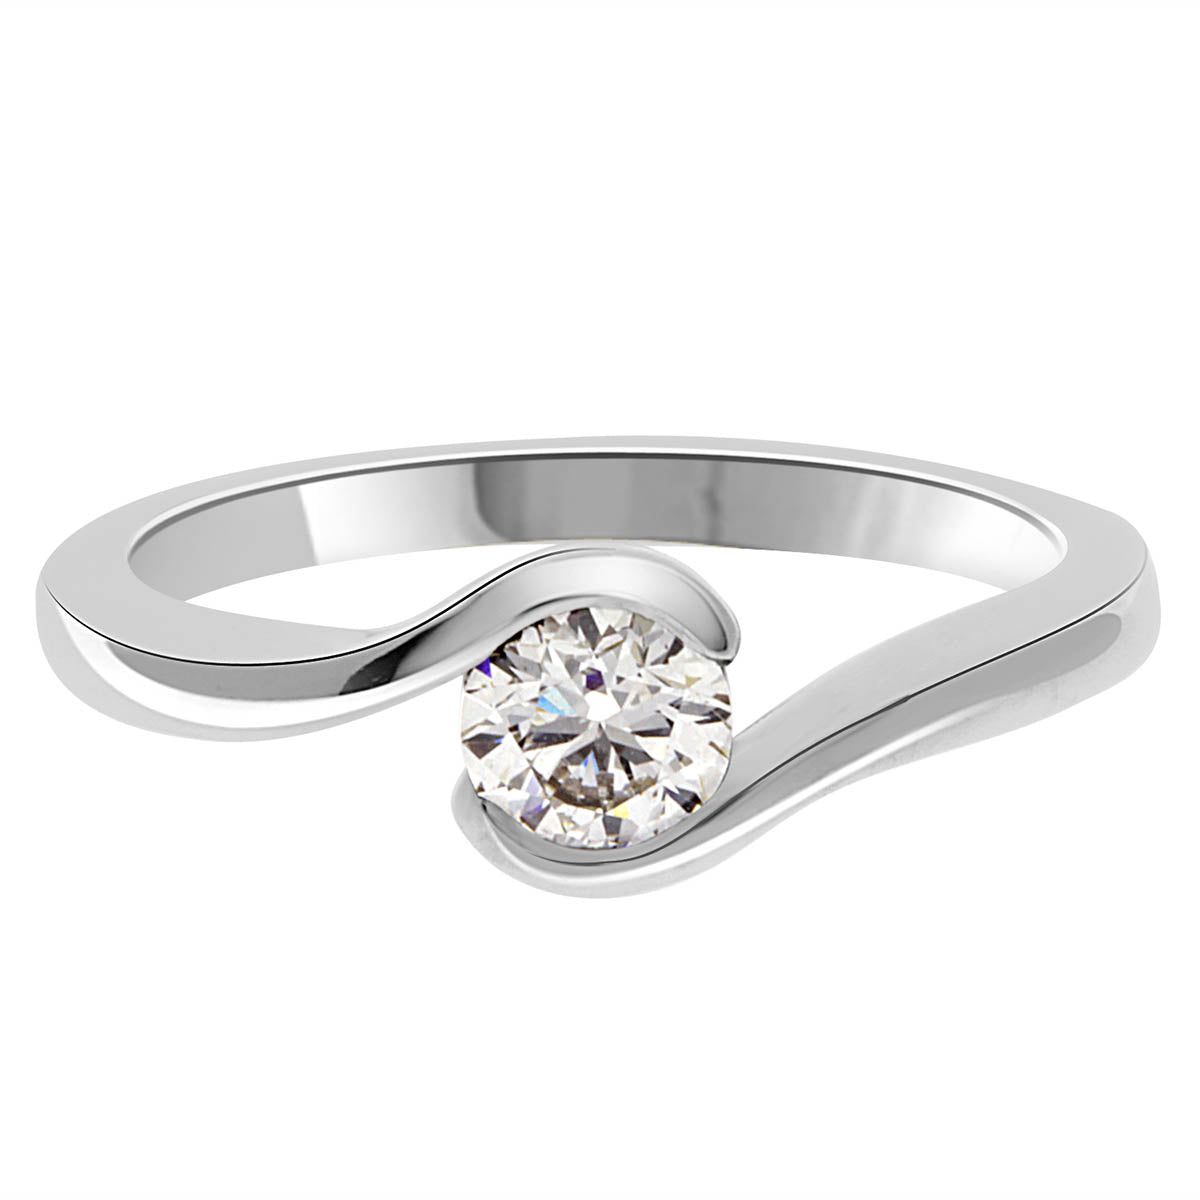 Tension Set Diamond Ring made in white gold